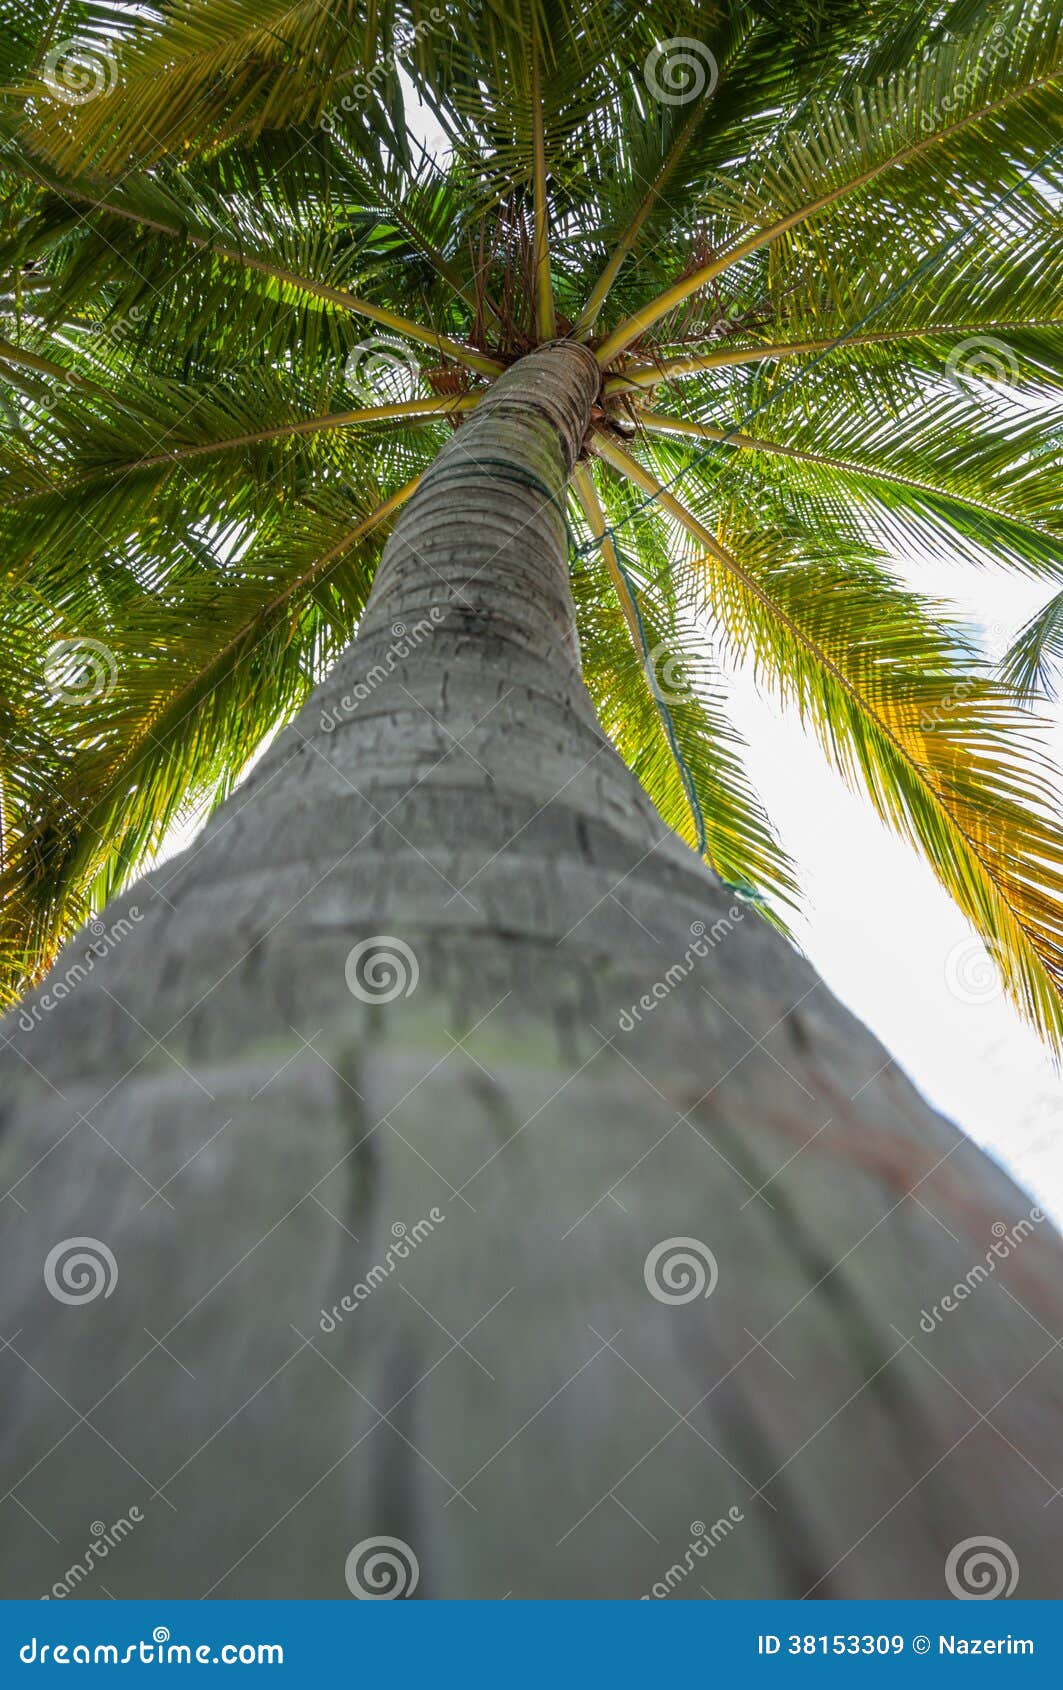 Coconut tree top stock image. Image of exotic, color - 38153309